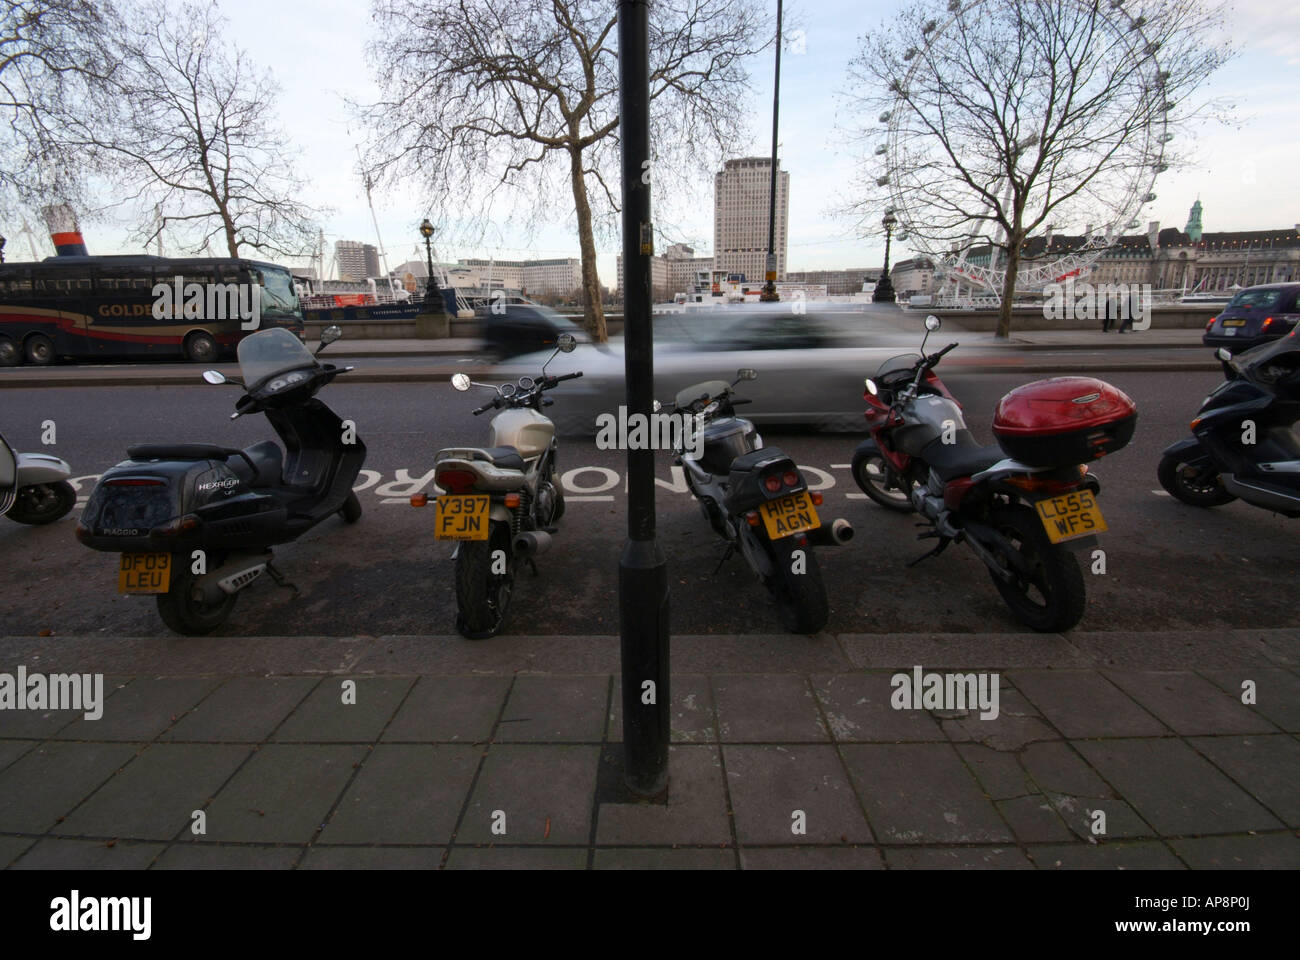 Motorbikes parked in the road in parking bays. Stock Photo